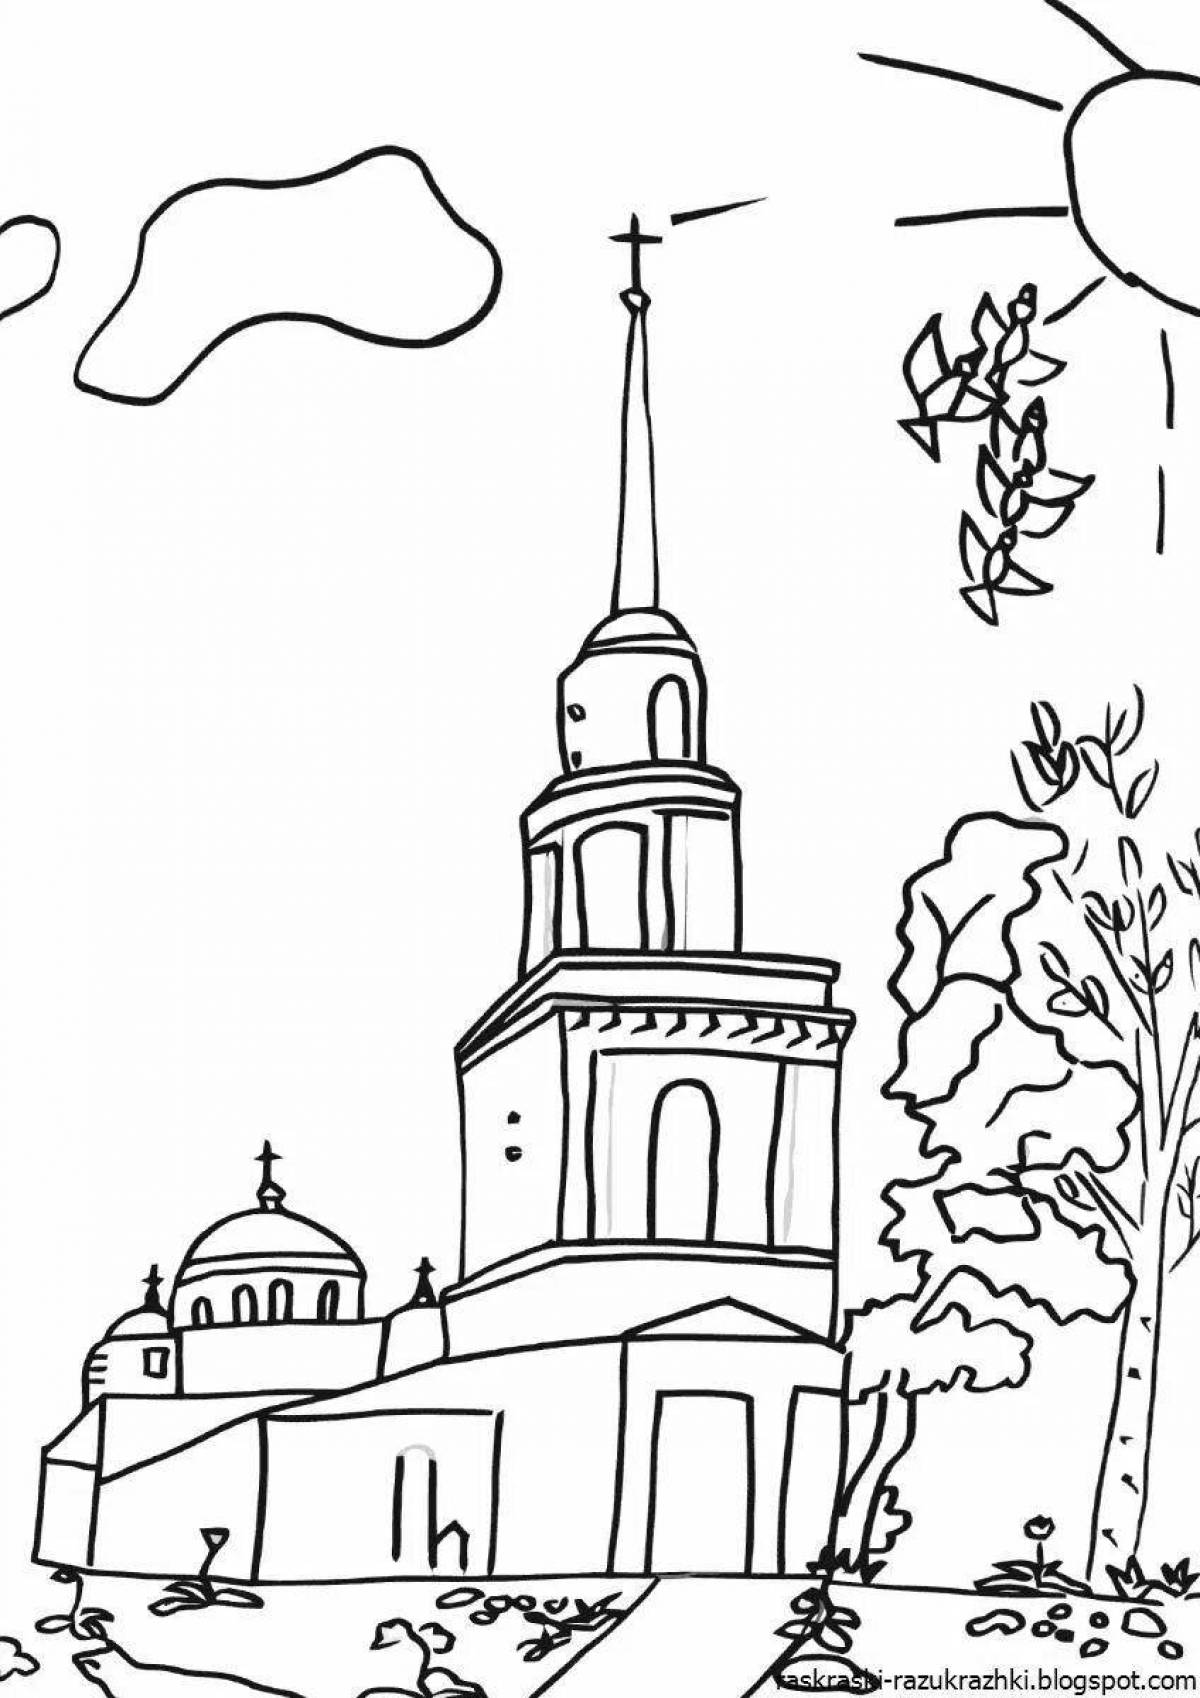 Joyful russia my homeland coloring book for children 6-7 years old